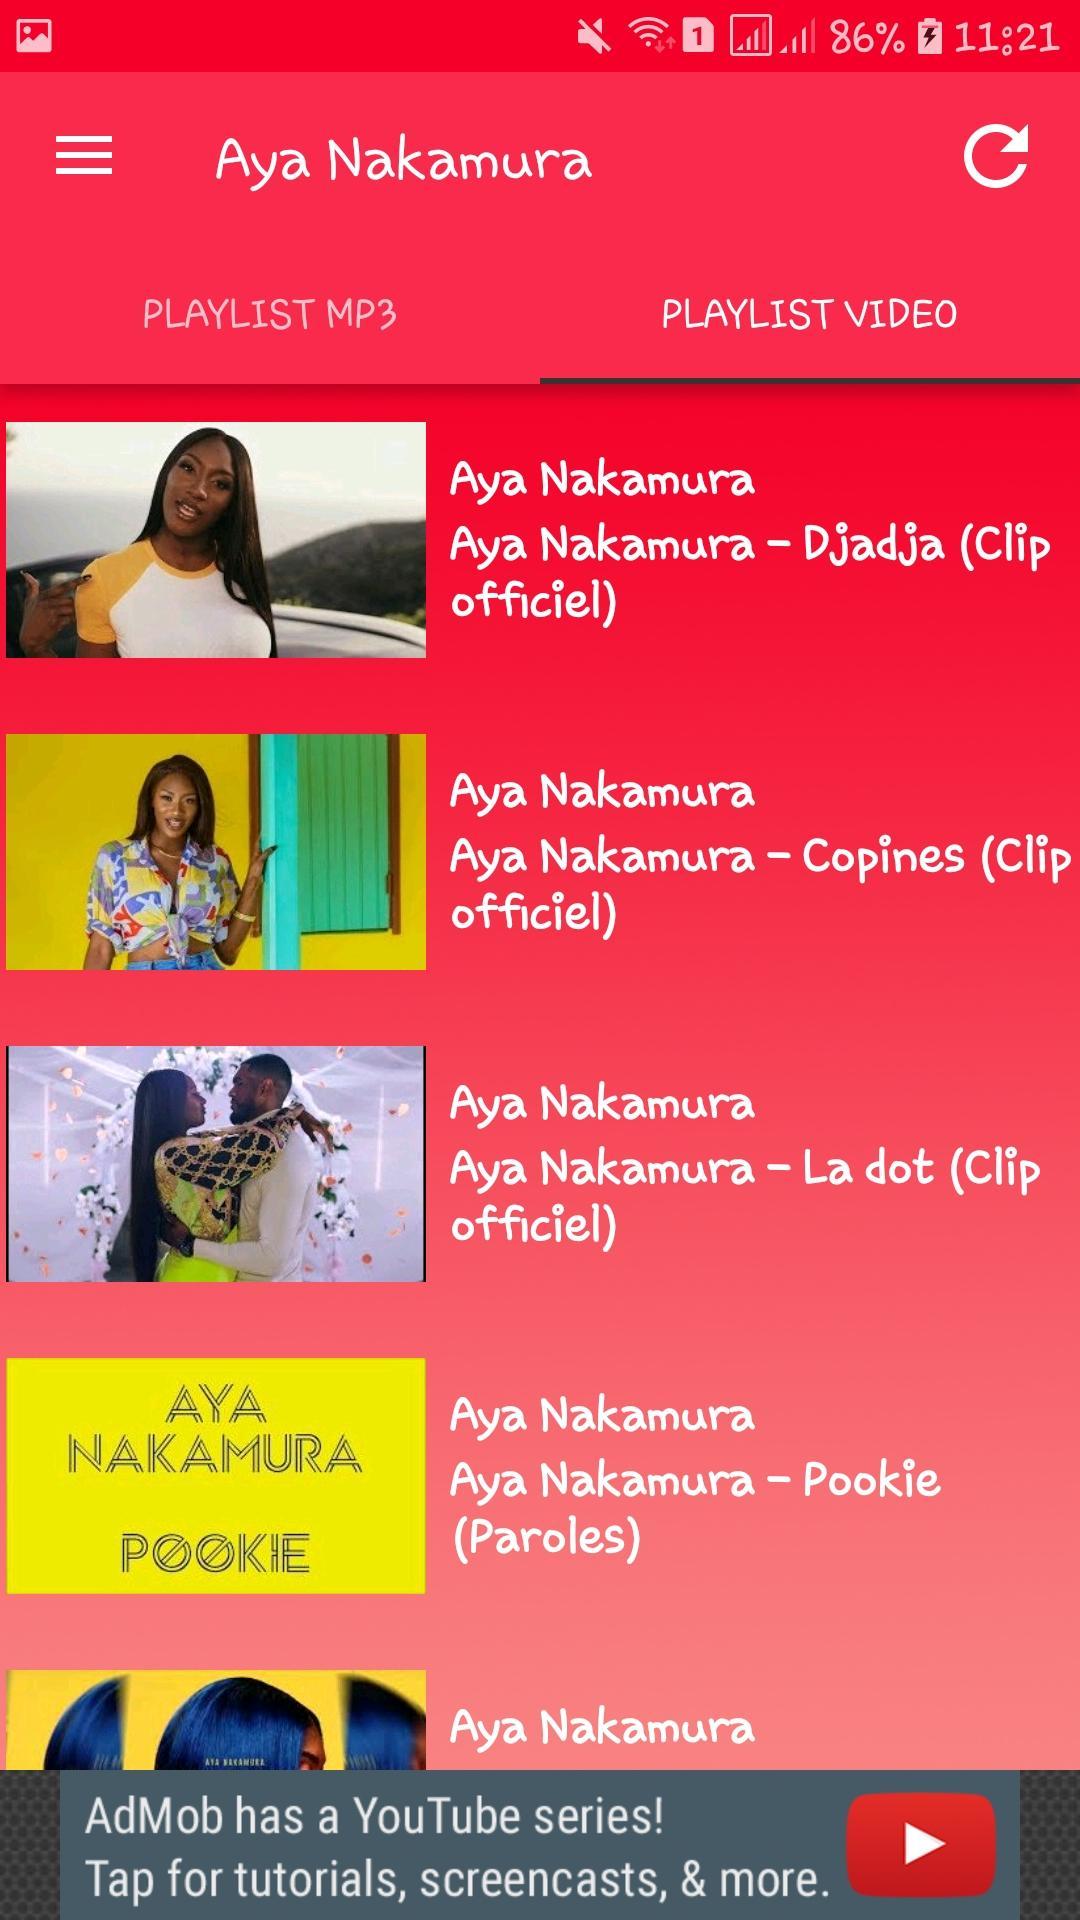 Aya Nakamura Chansons for Android - APK Download